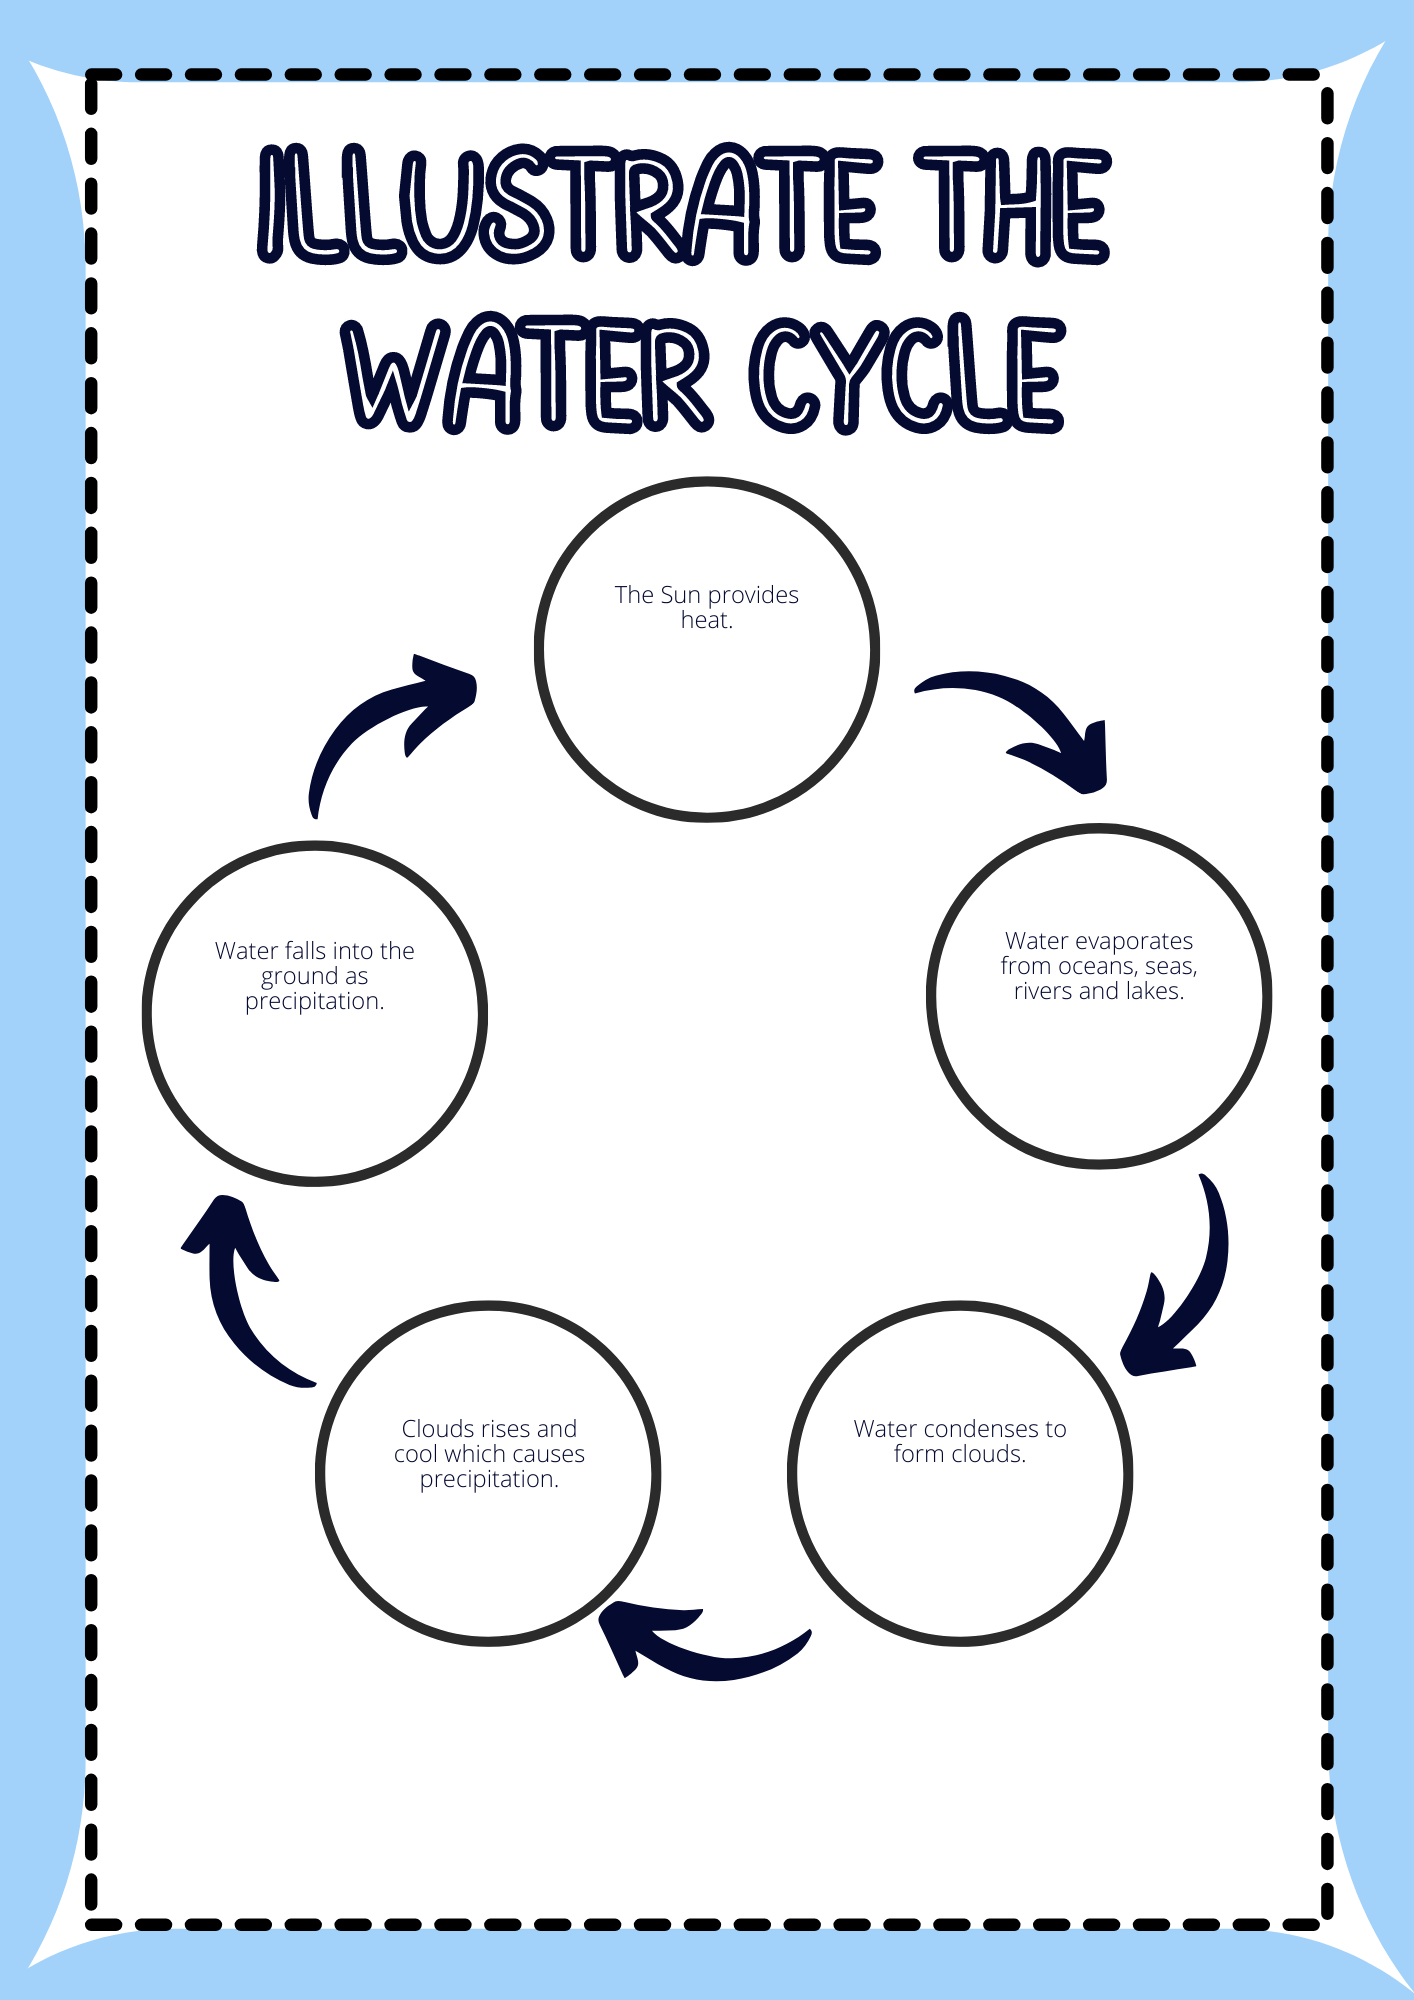 Illustrate the water cycle - infographic